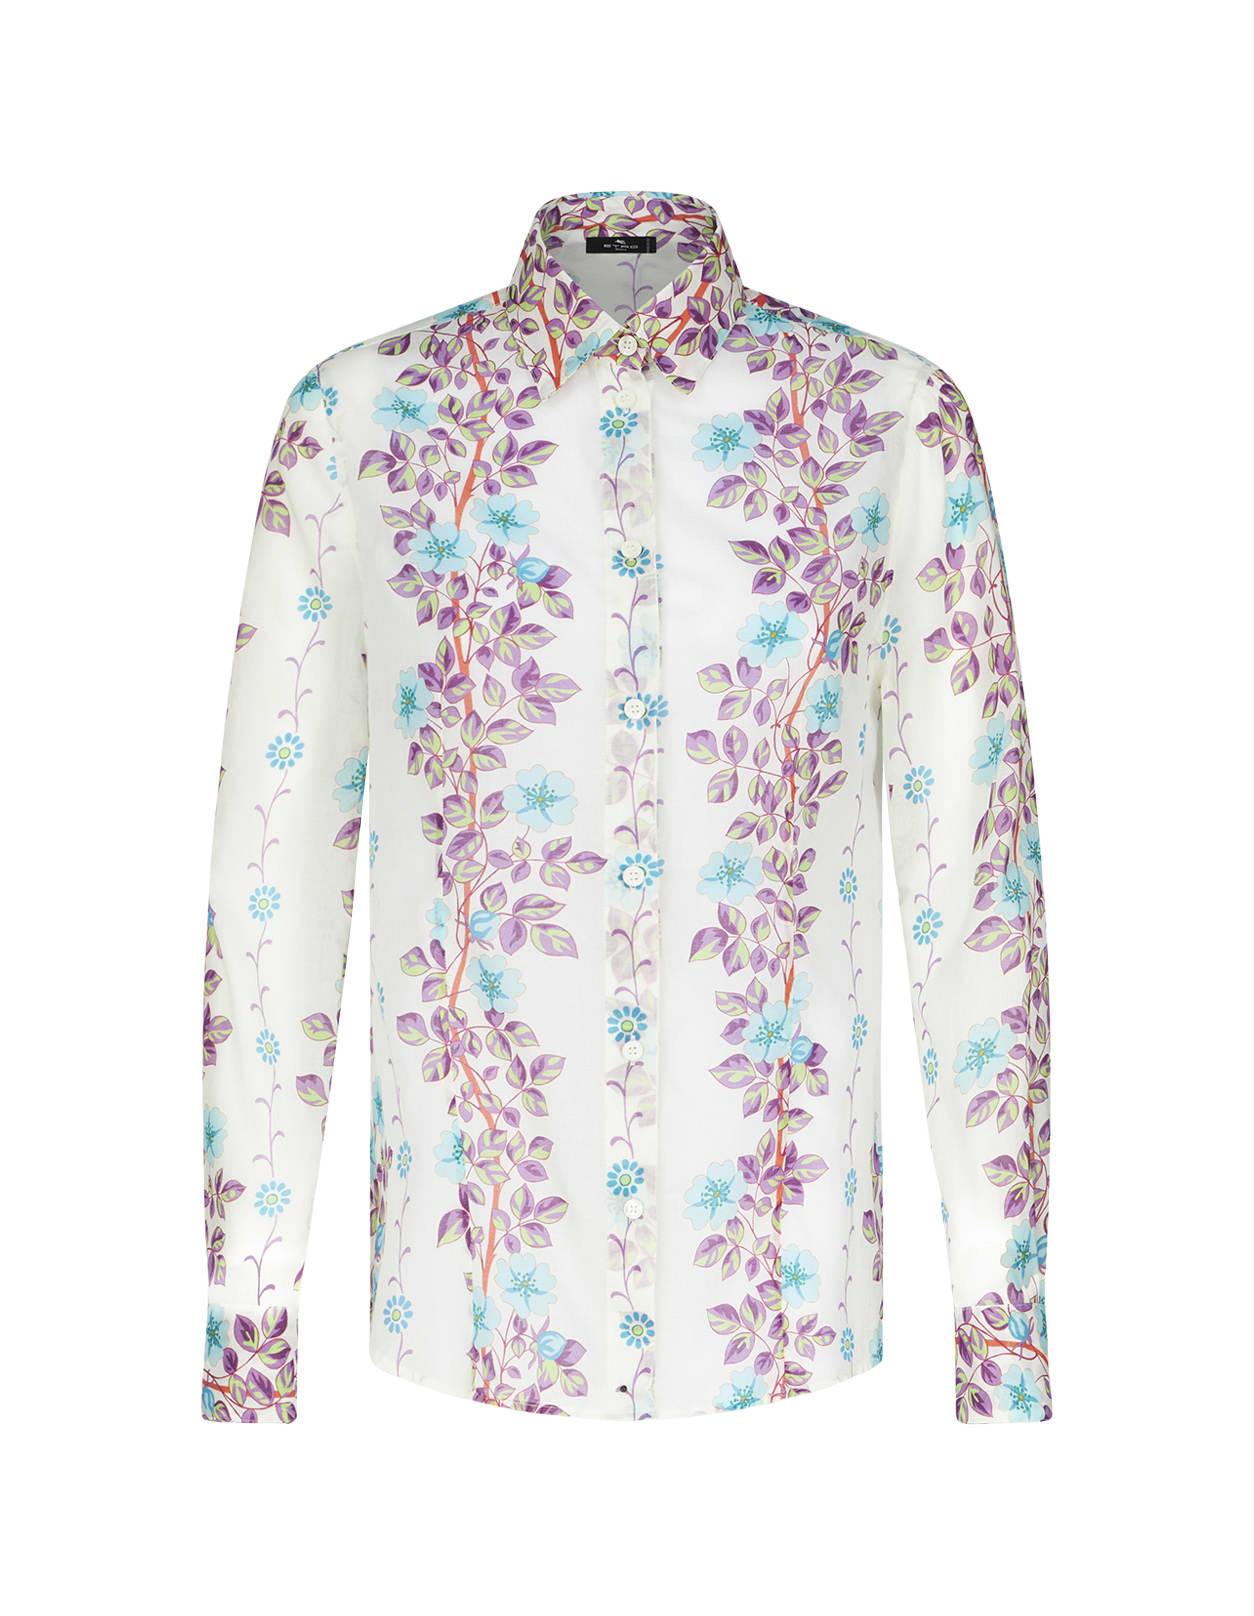 Etro White Shirt With Placed Floral Print